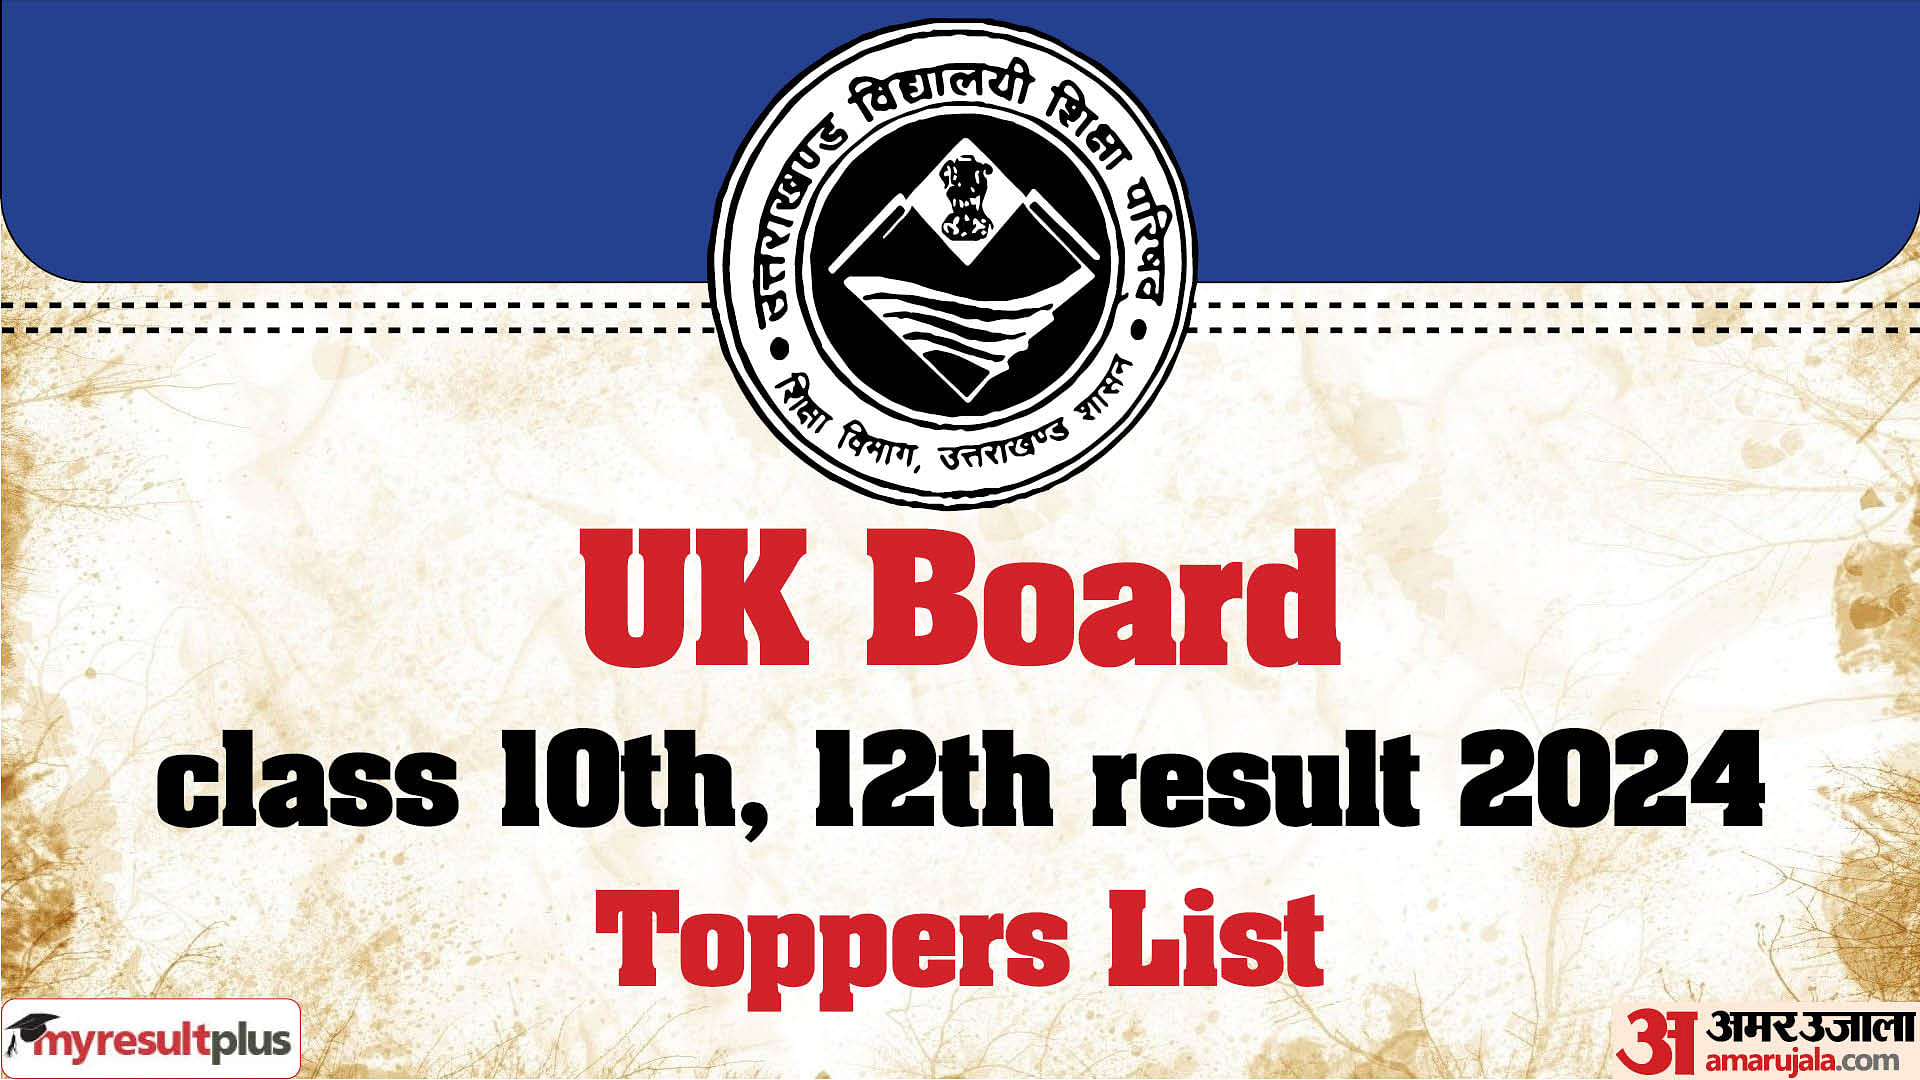 UK Board class 10th, 12th result 2024 declared, Read about the pass percentage and toppers list here